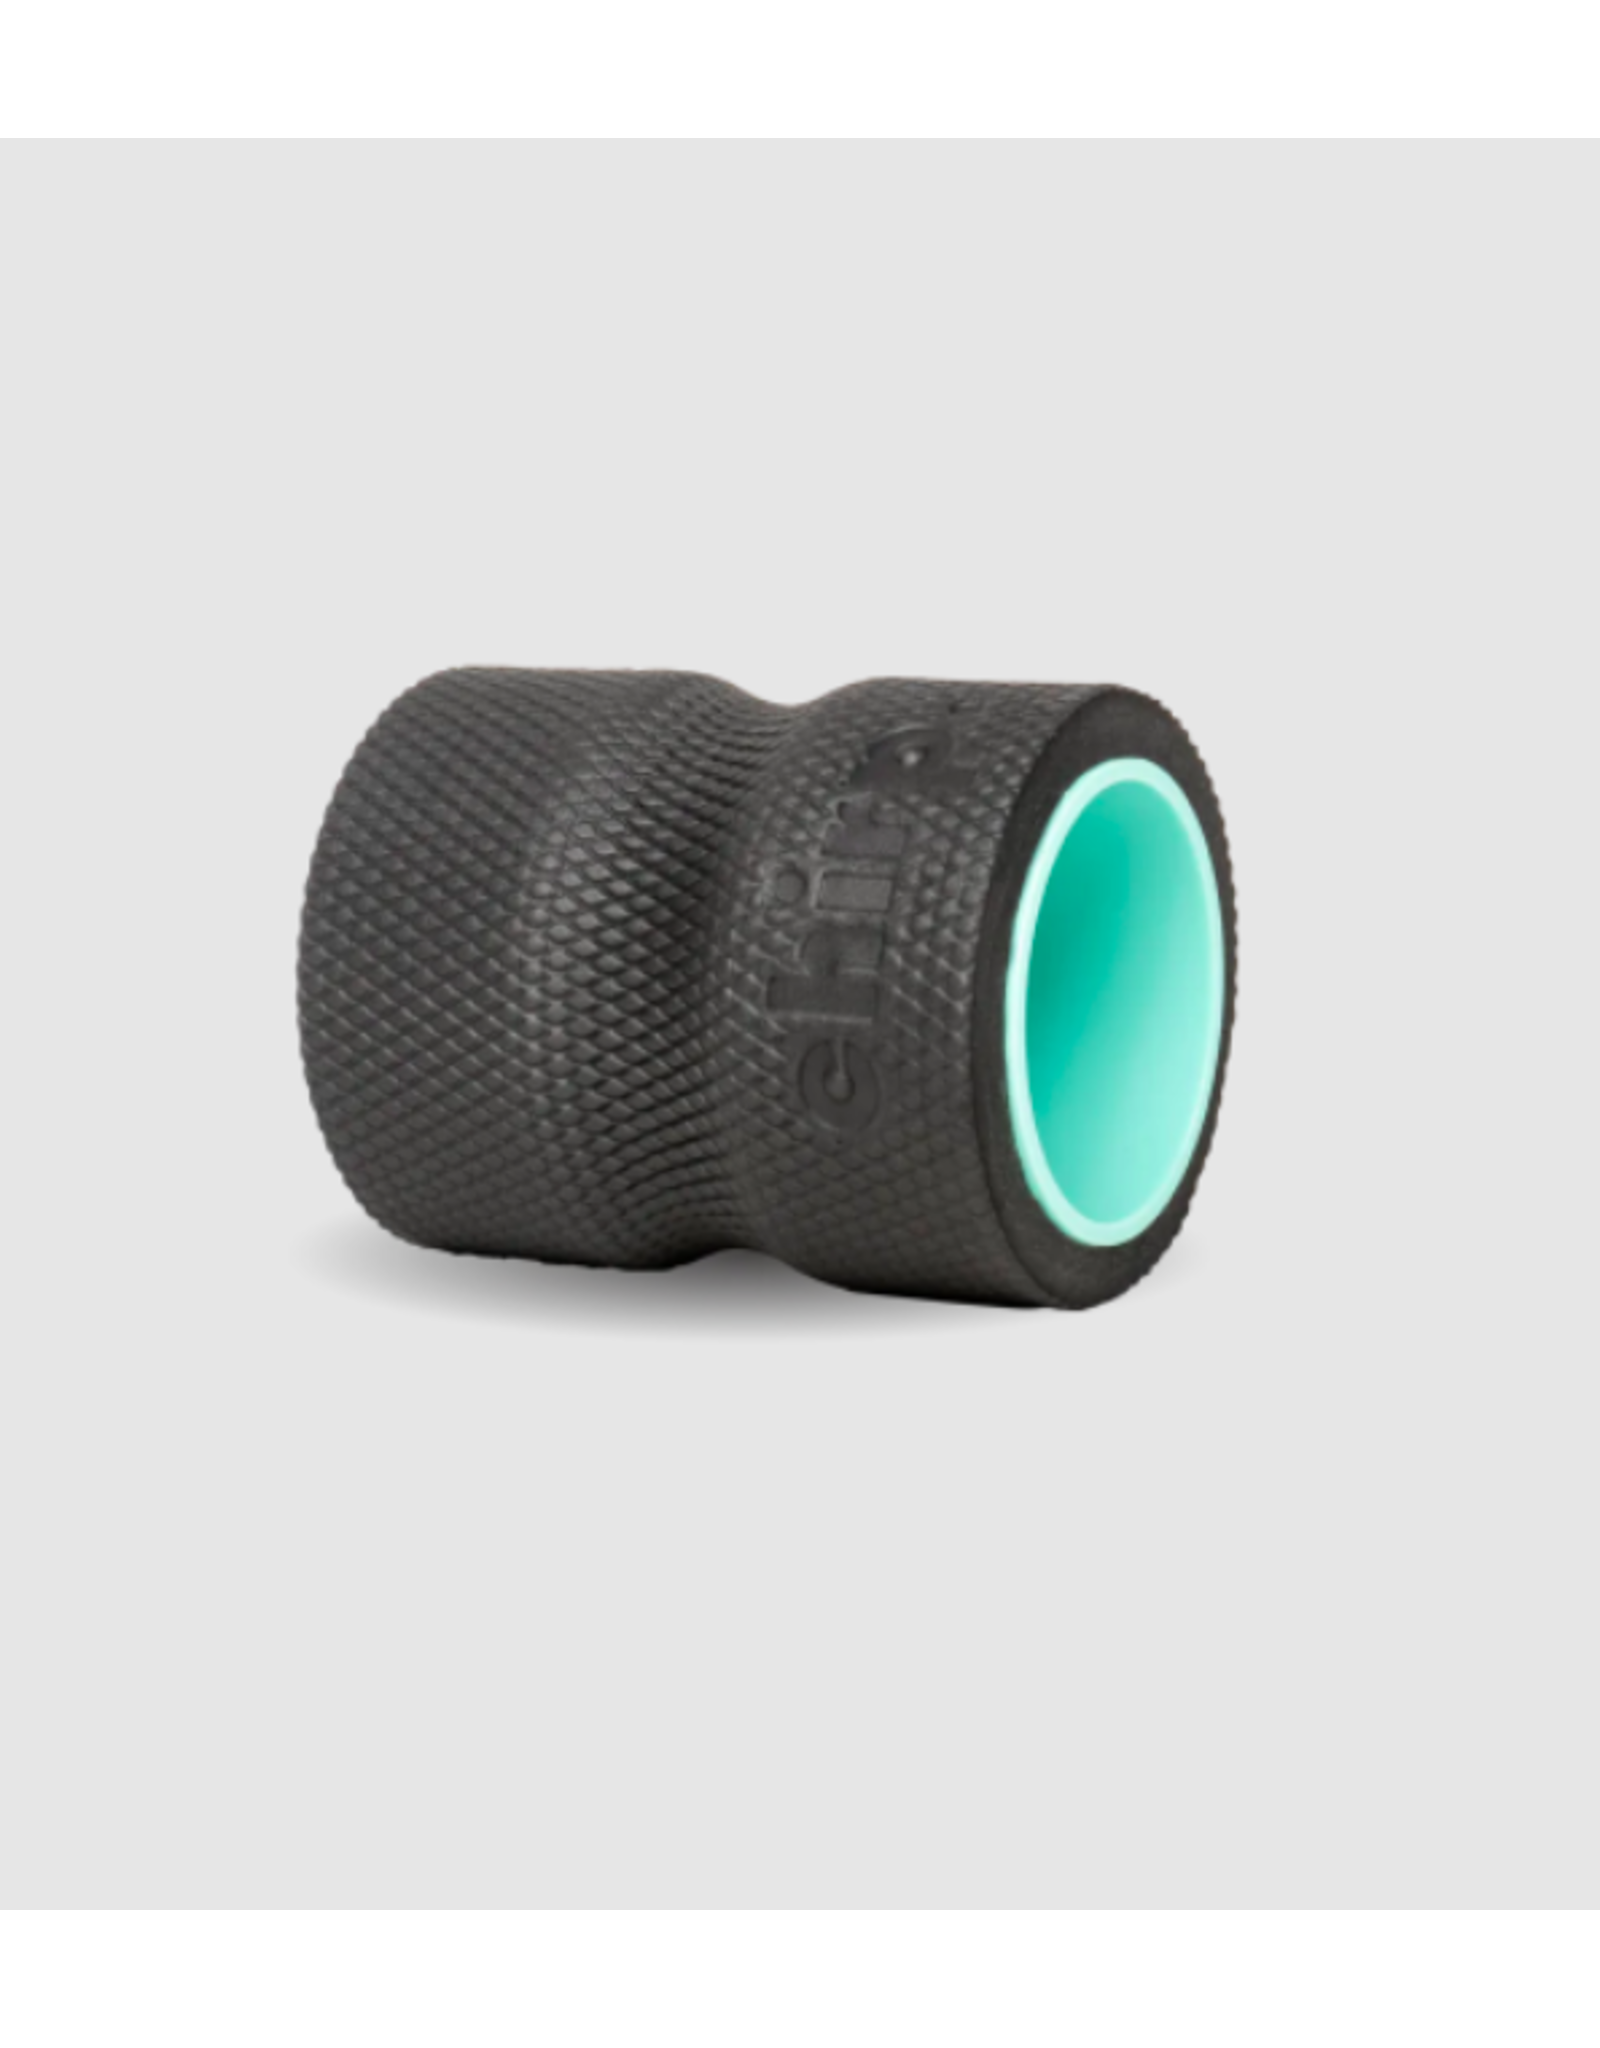 Chirp Muscle Roller + 4 Inch Wheel